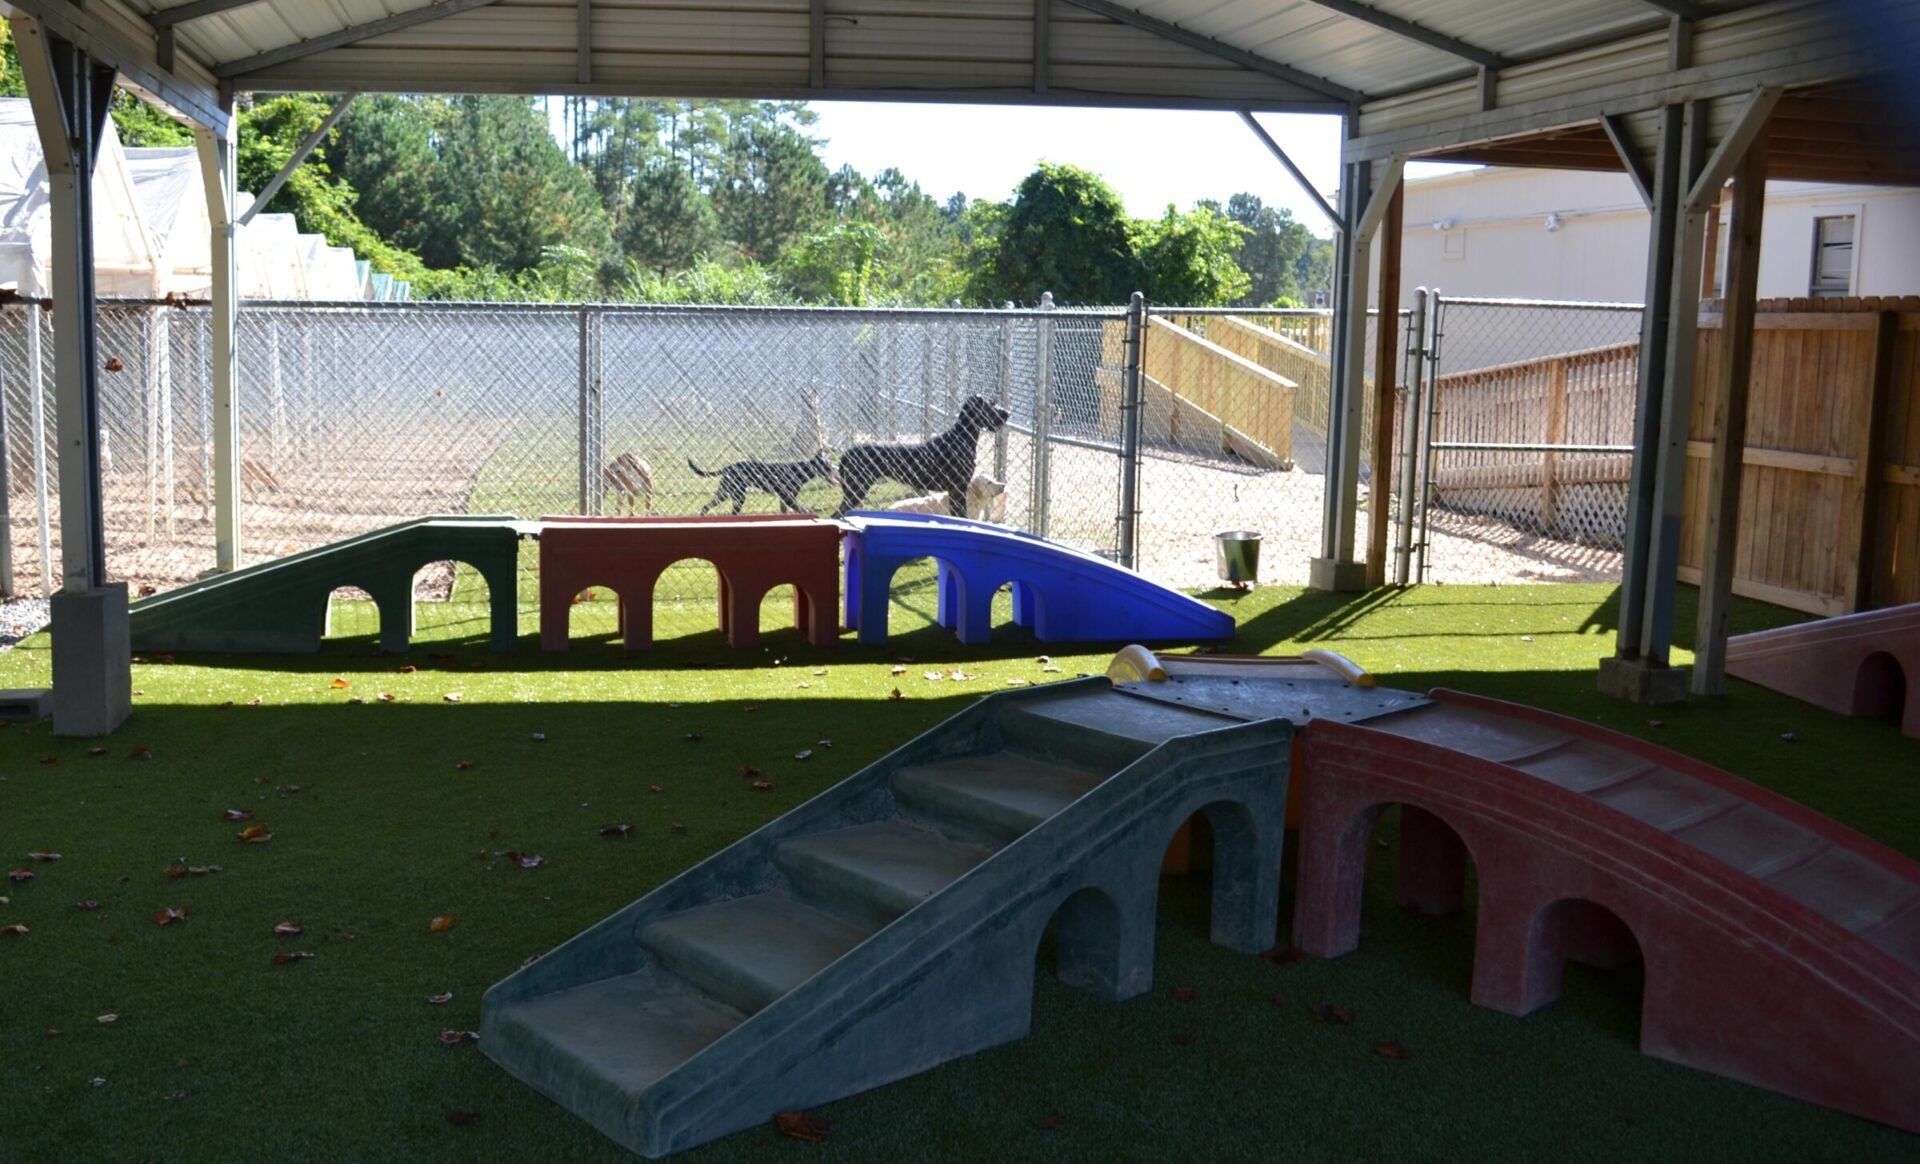 An outdoor canine playground covered by a shelter, featuring artificial grass, colorful ramps, and tunnels, with a fence around the perimeter.